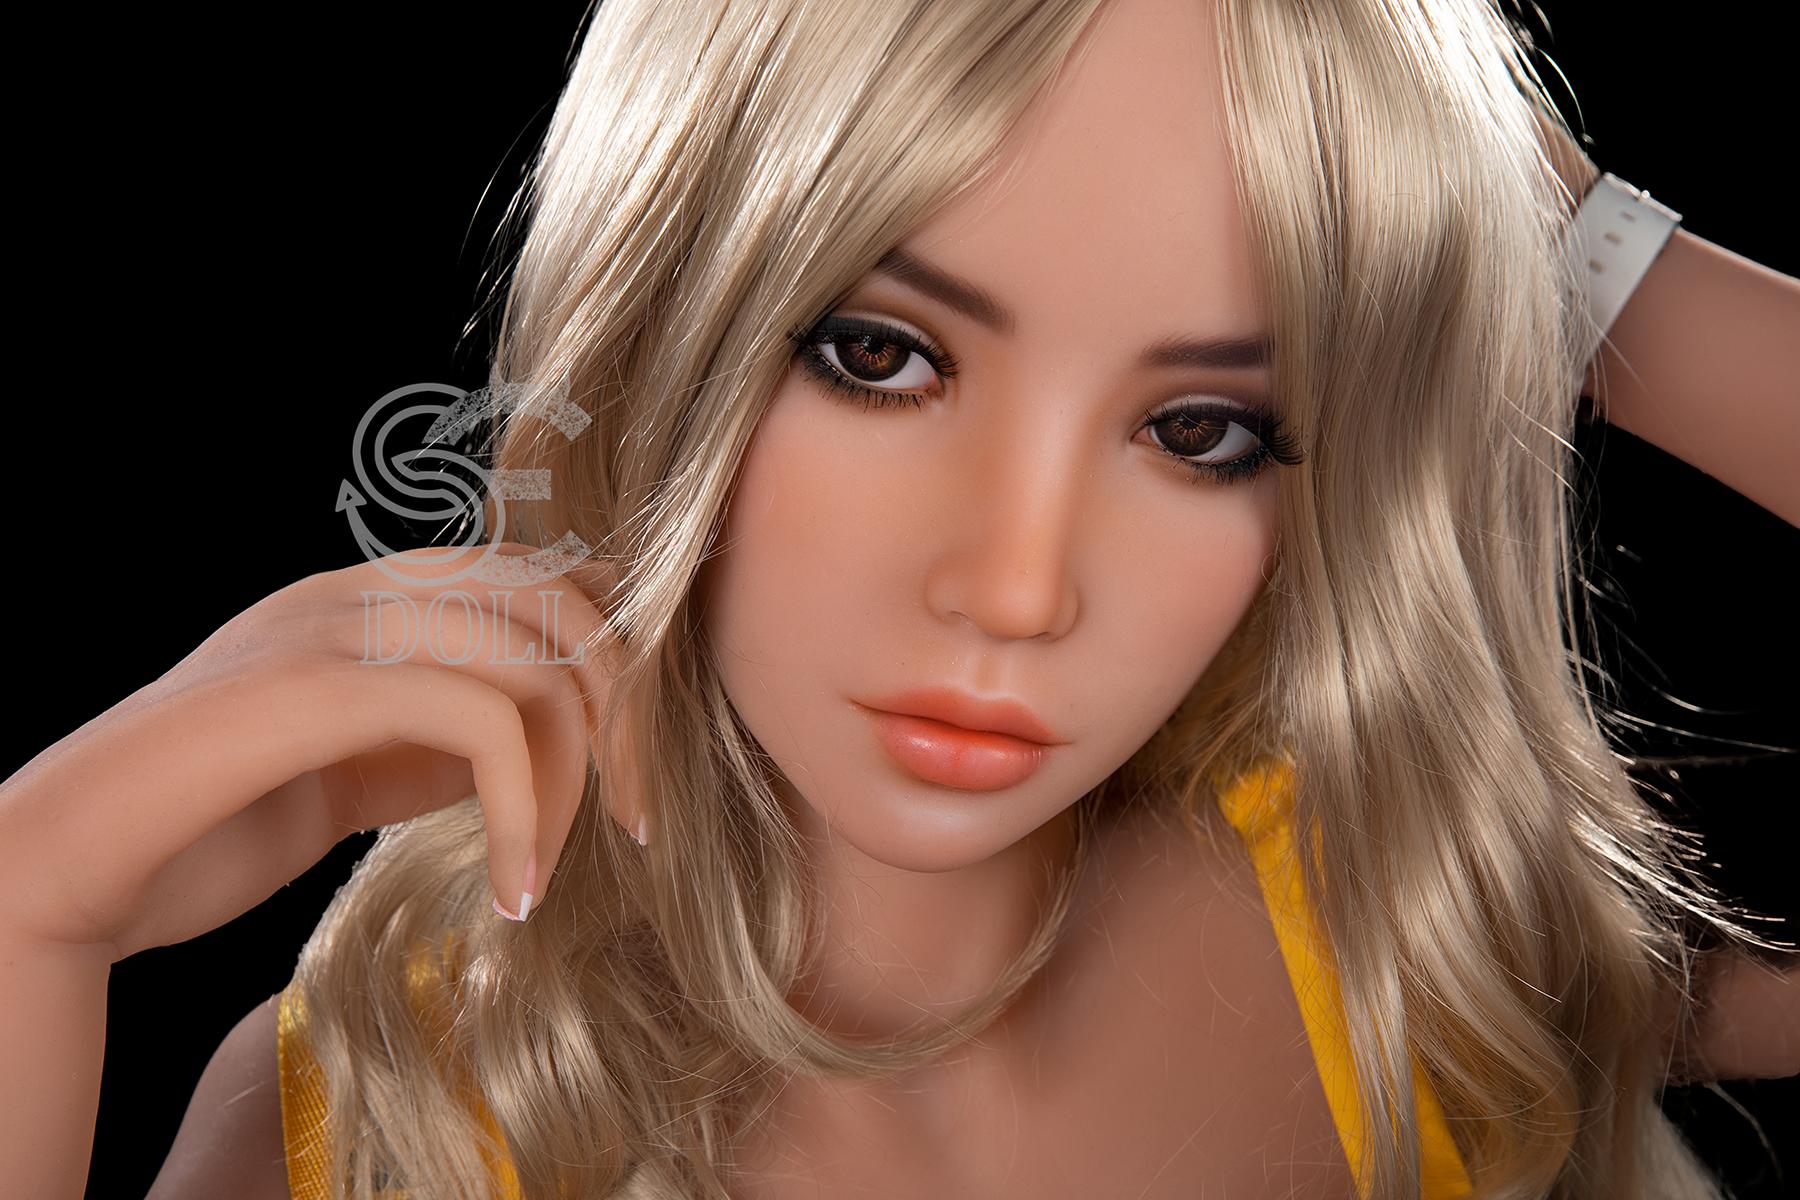 Love doll Jenny with blonde hair and big breasts